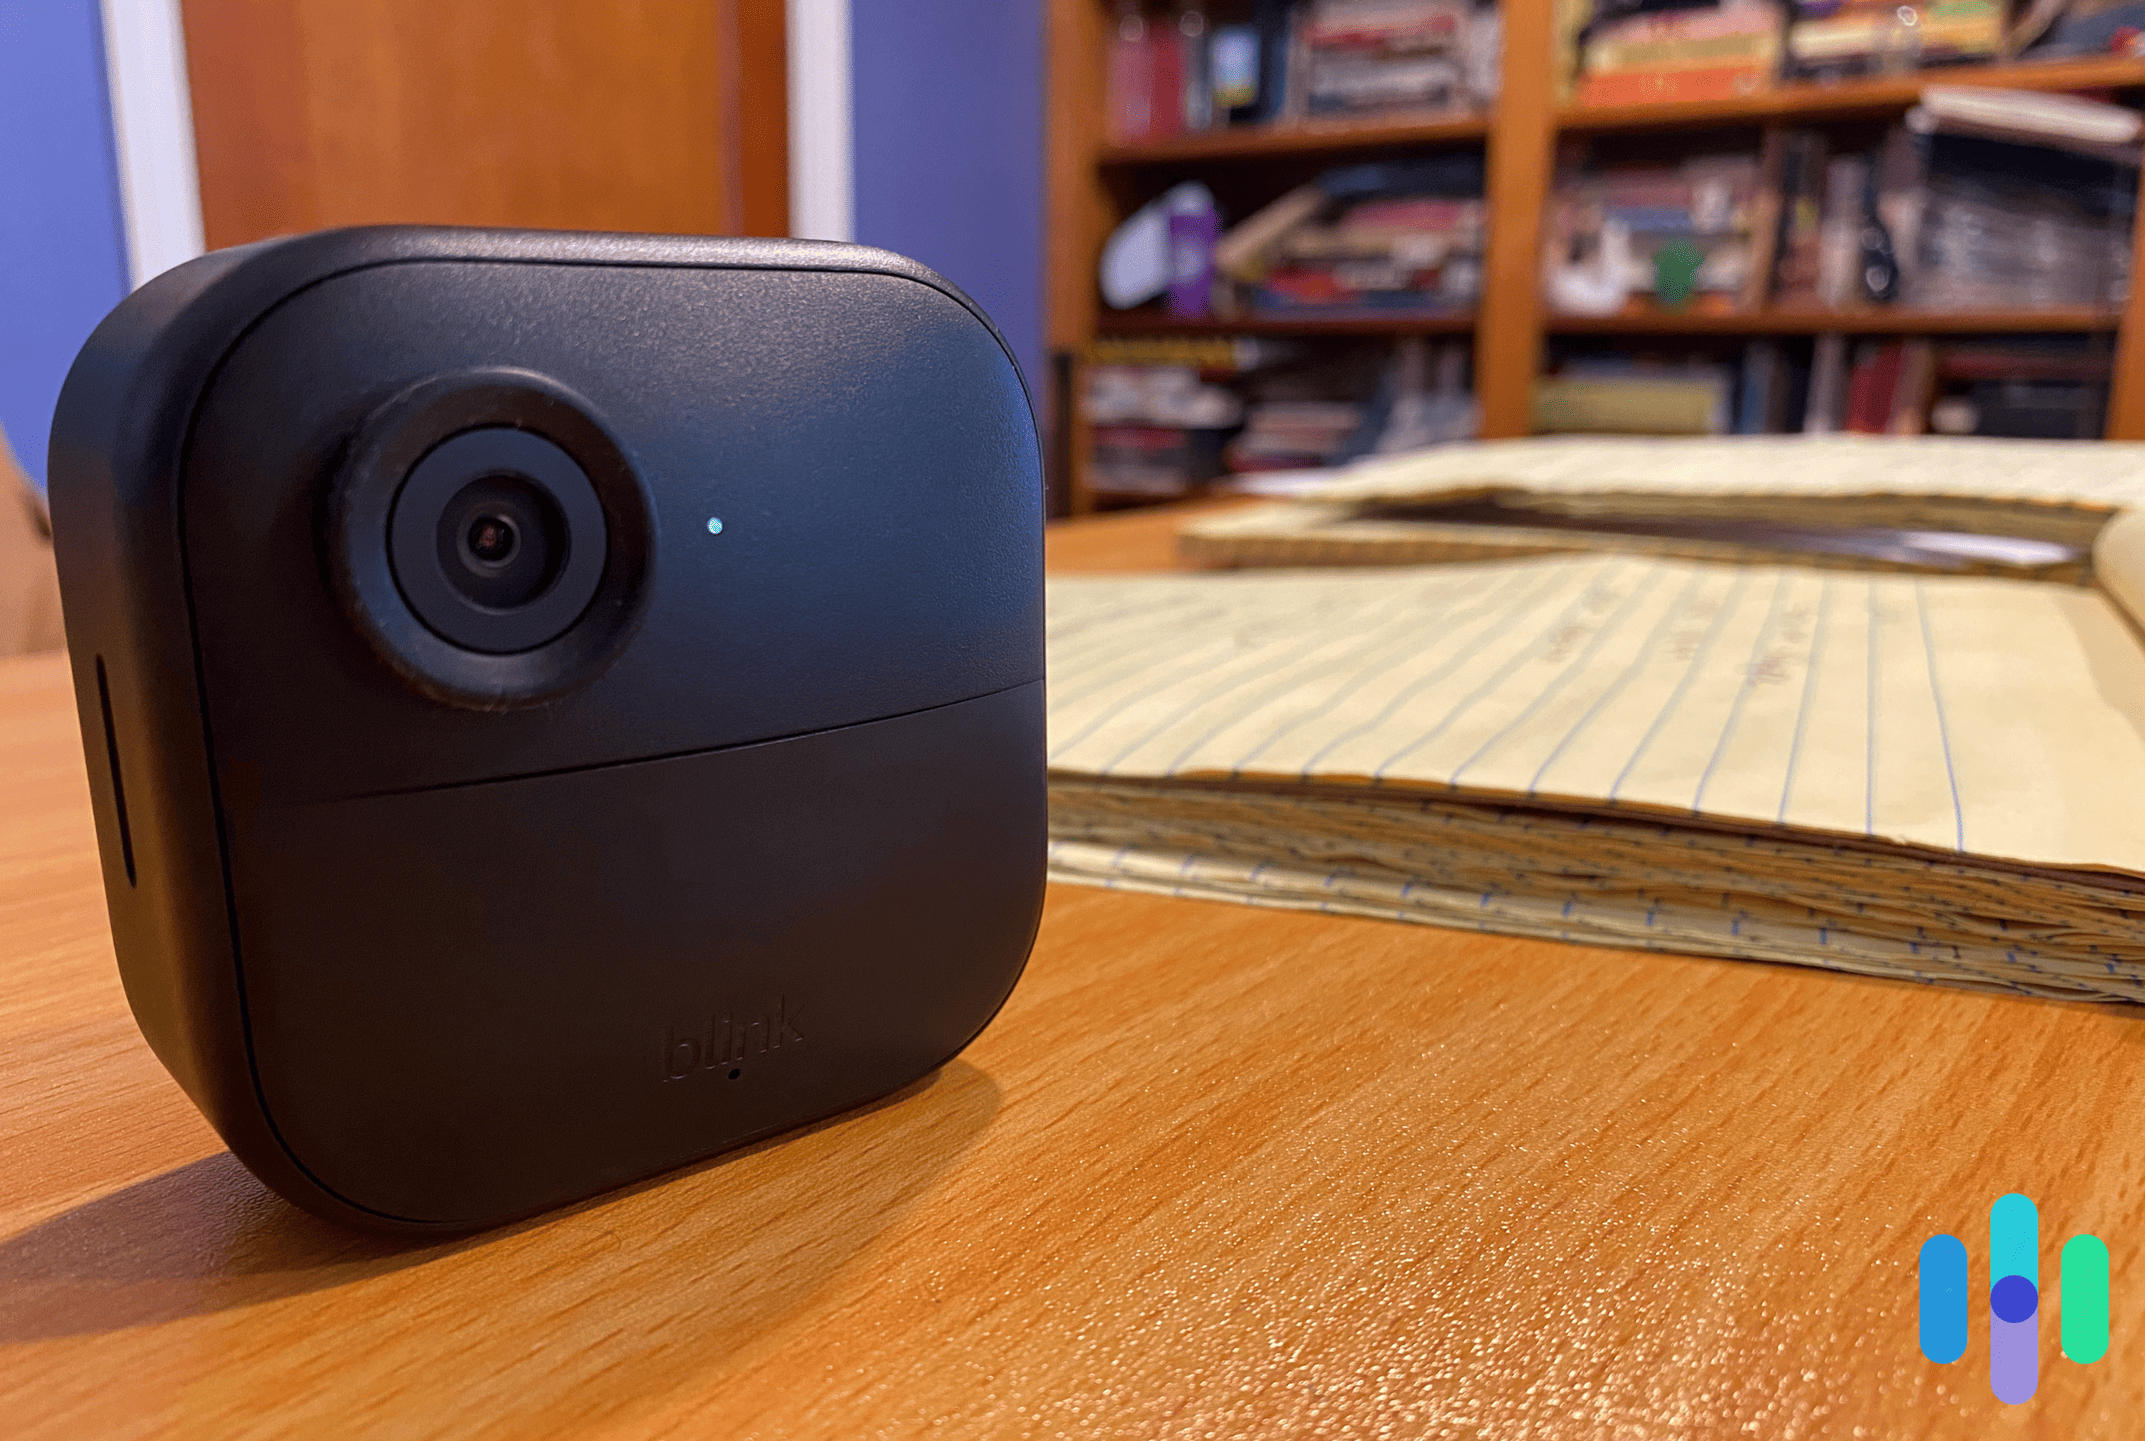 releases Blink Outdoor 4 security camera with person